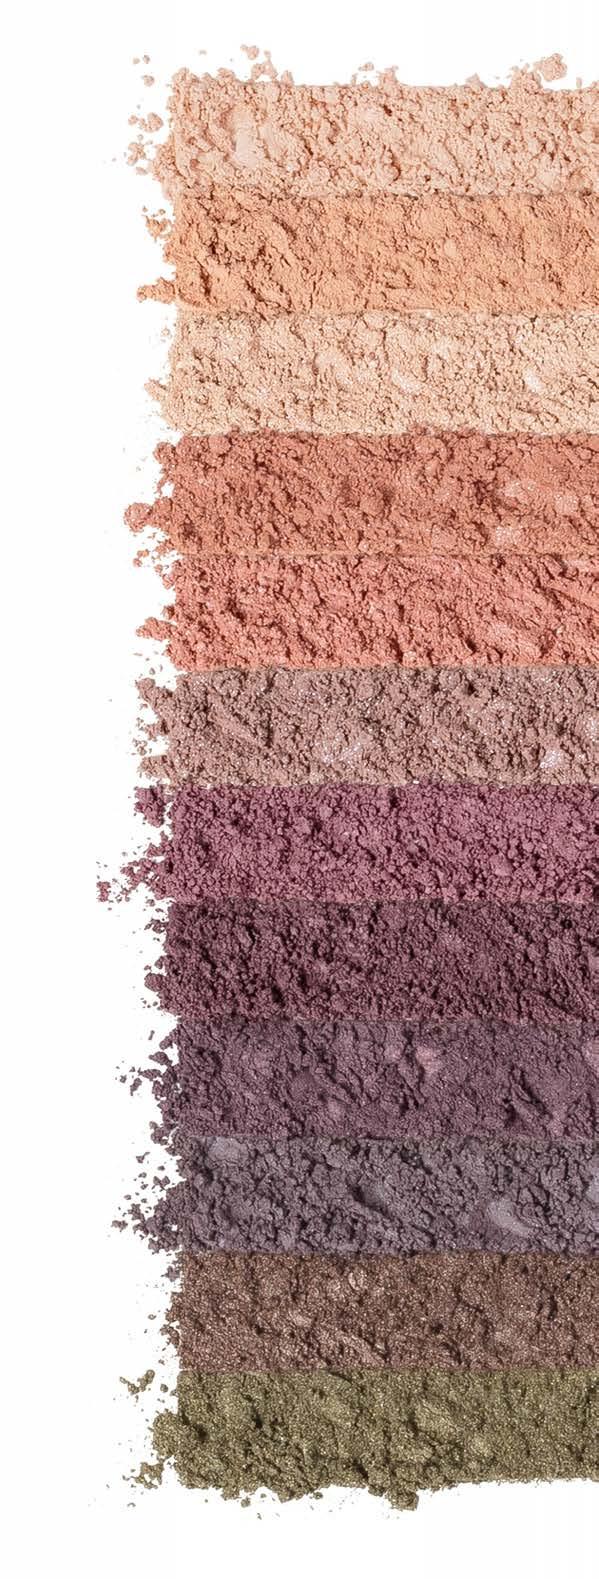 21022) Light mauve with shimmer Define your eyes with a range of matte and shimmering eyeshadow shades. Our concentrated, mineral-based shadows glide on smoothly for velvety, longlasting wear.